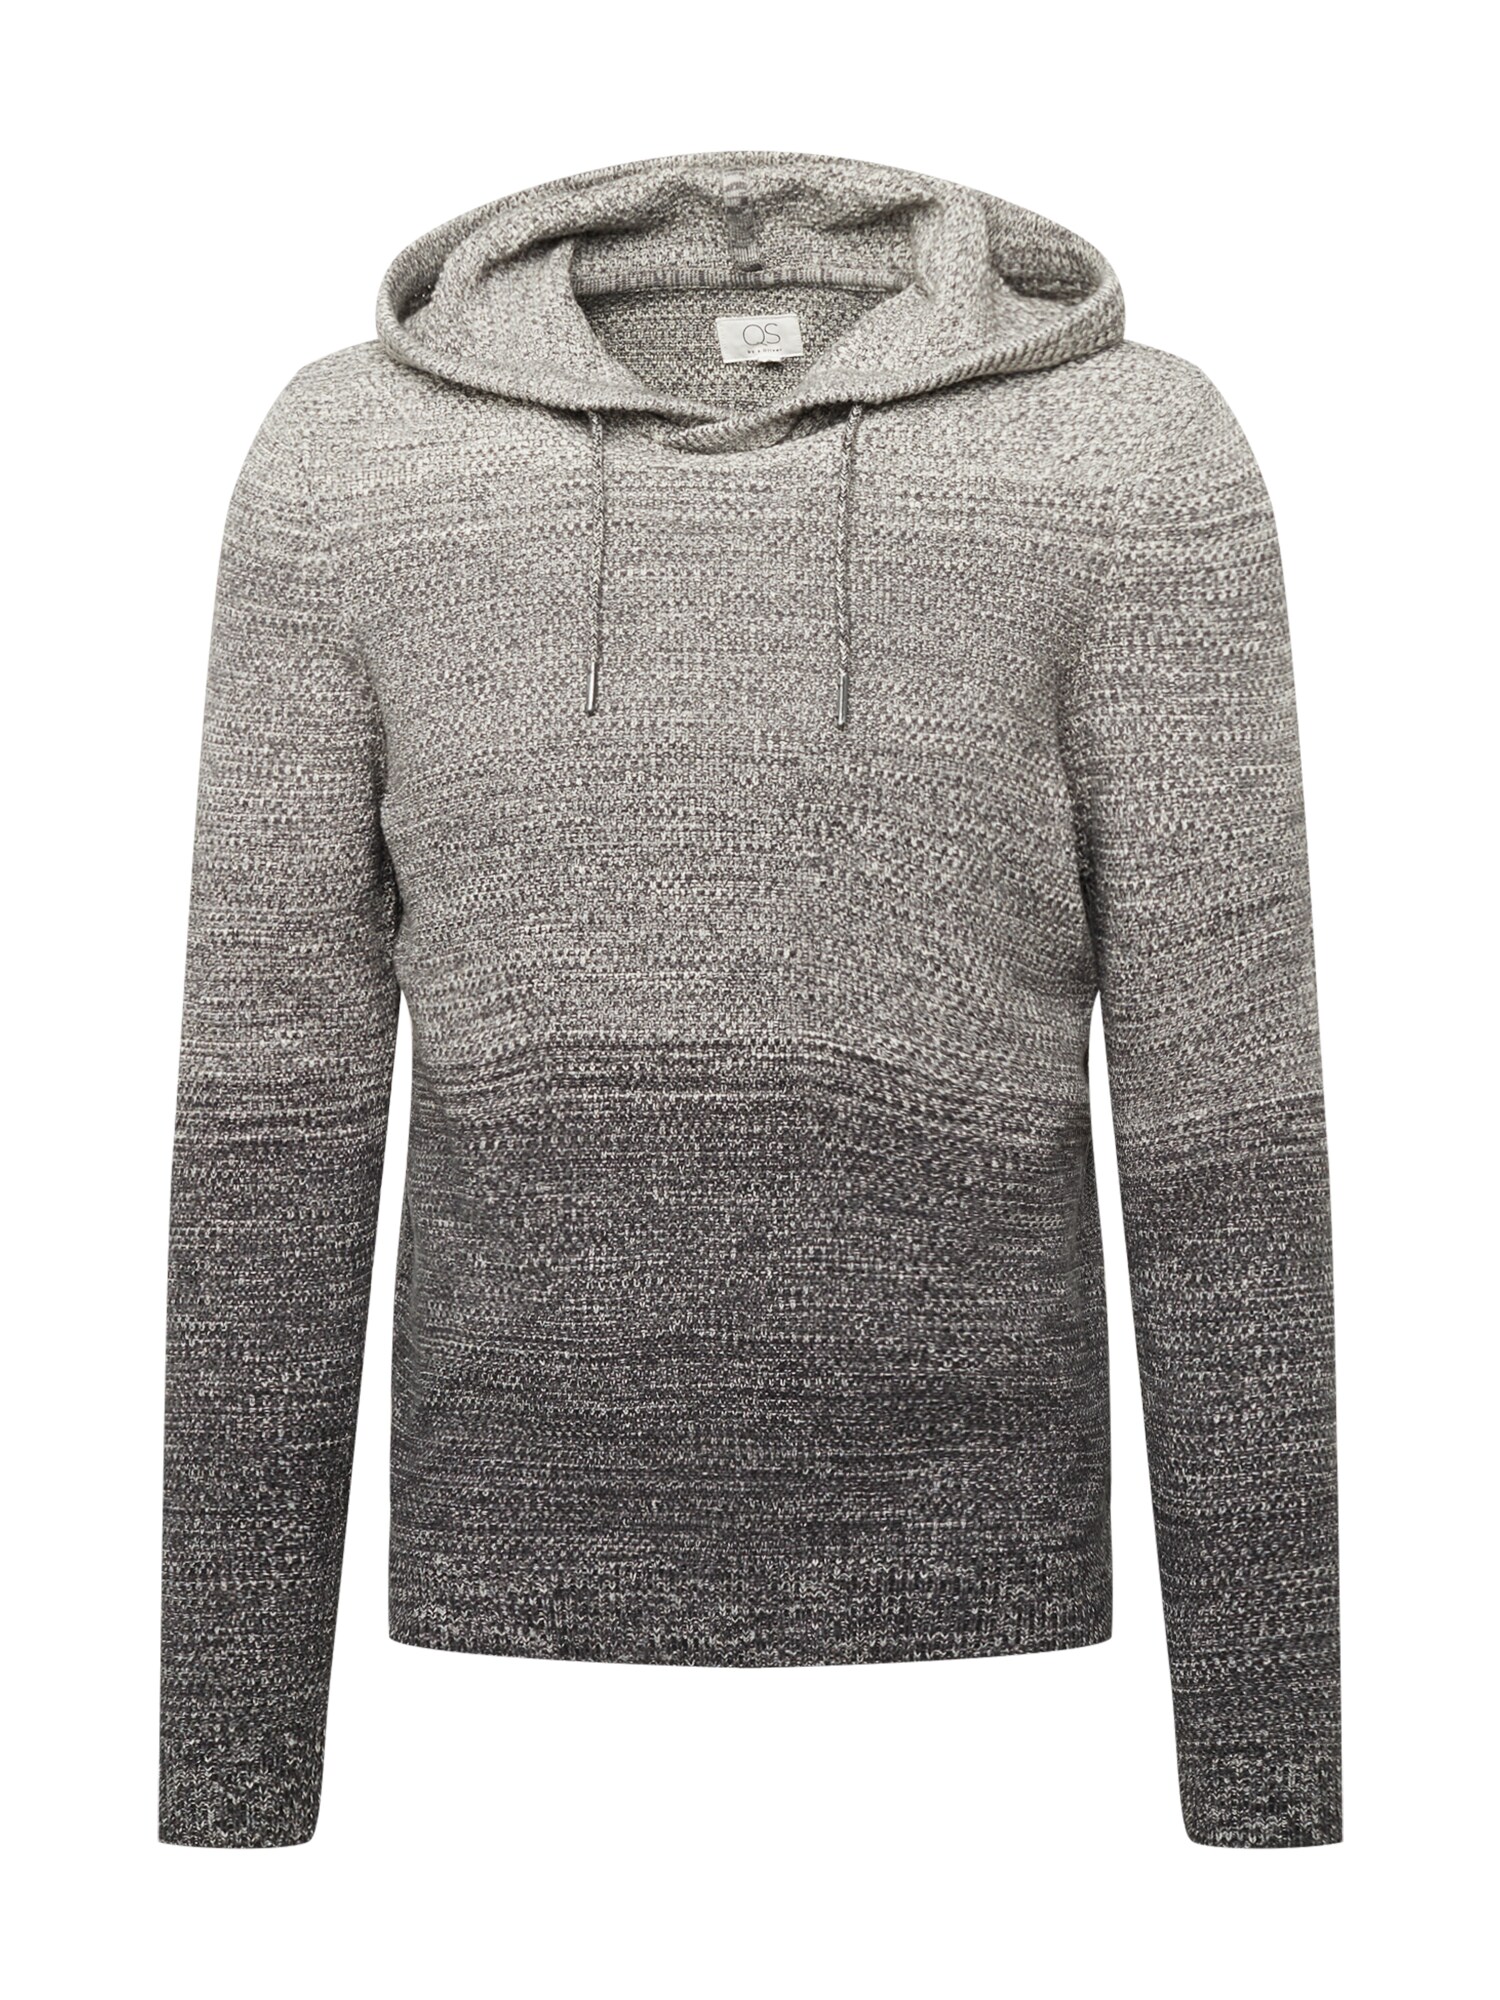 QS by s.Oliver QS by s.Oliver Pullover anthrazit / graumeliert